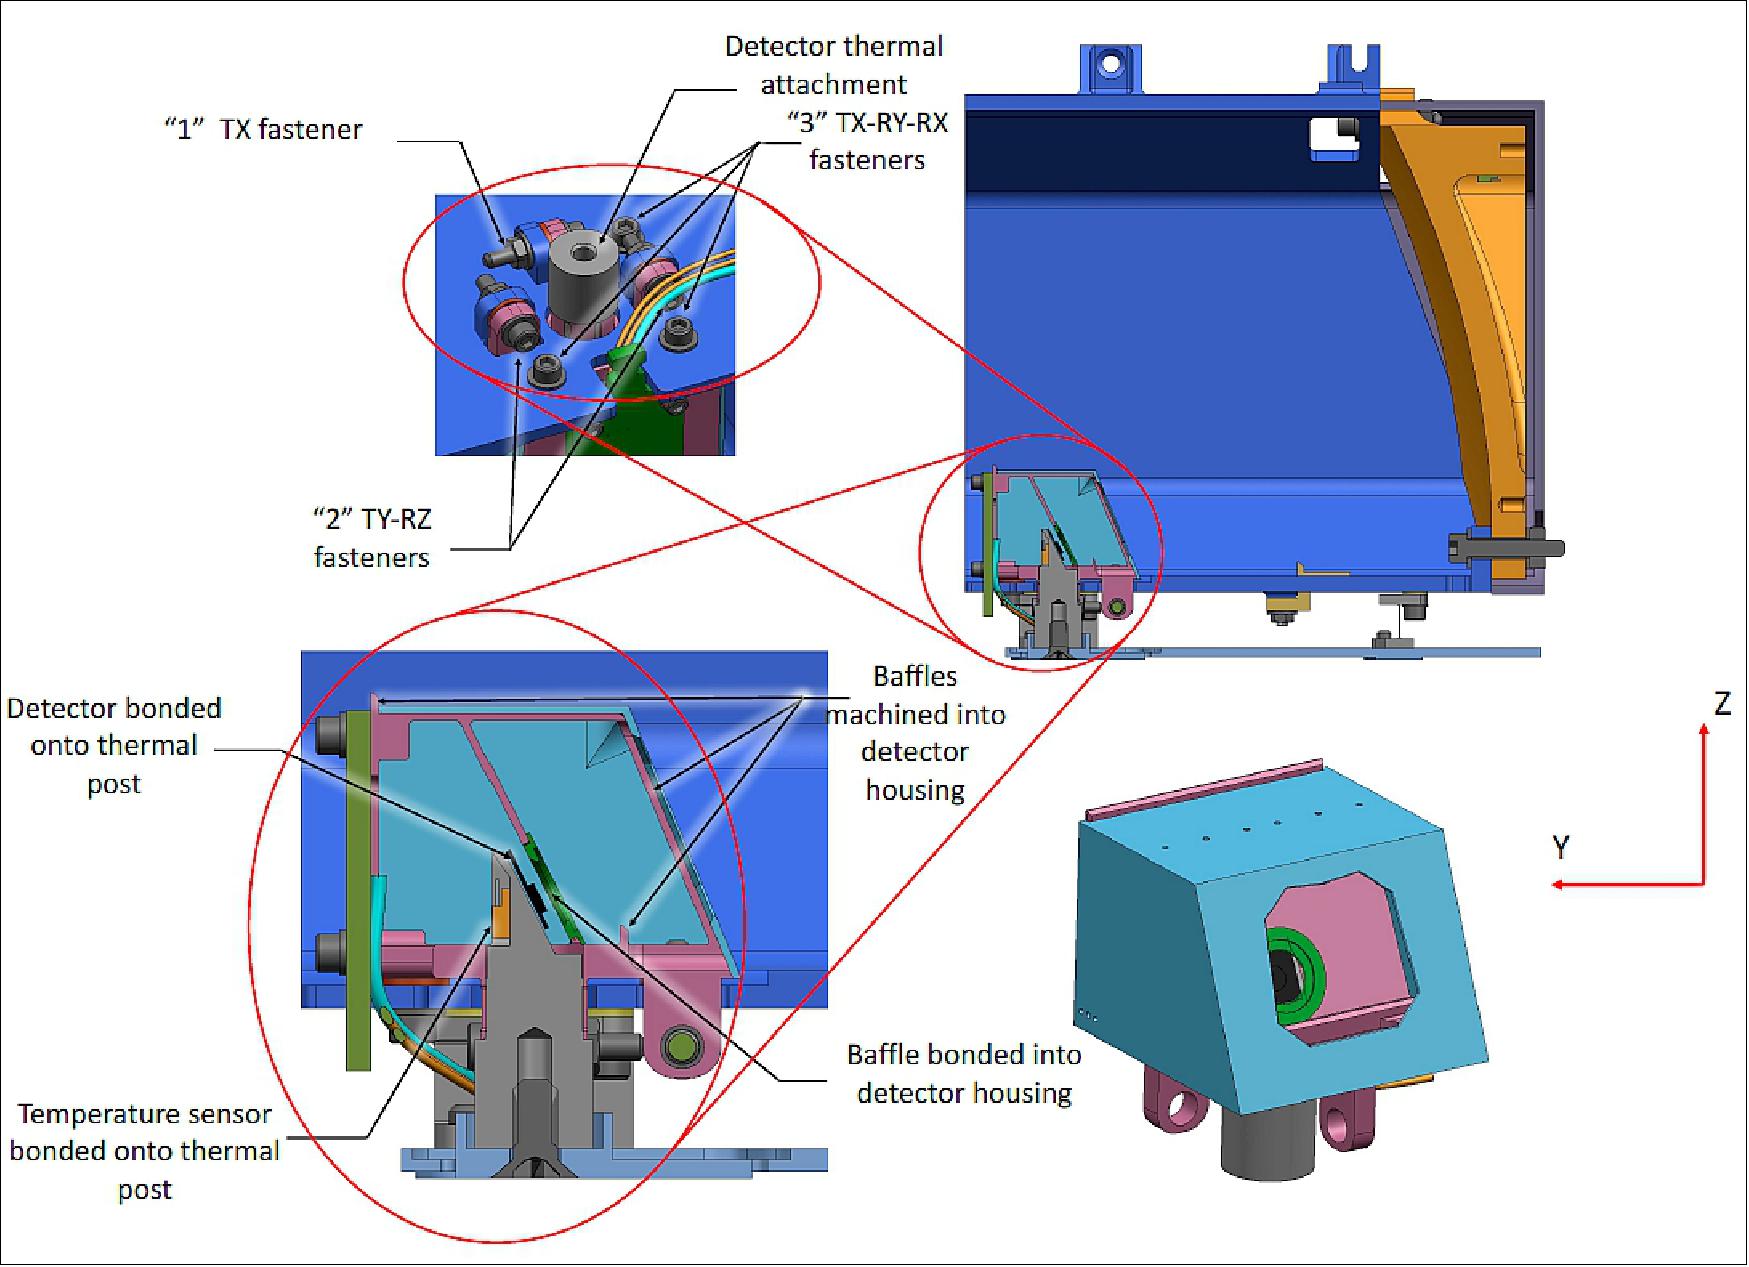 Figure 14: Detector semi-kinematic attachment to the receiver housing (top left), detector assembly section view (lower left), receiver section view (top right), and detailed three-dimensional (3D) view of the detector assembly (lower right) (figure updated from Ref. 12), image credit: LF collaboration